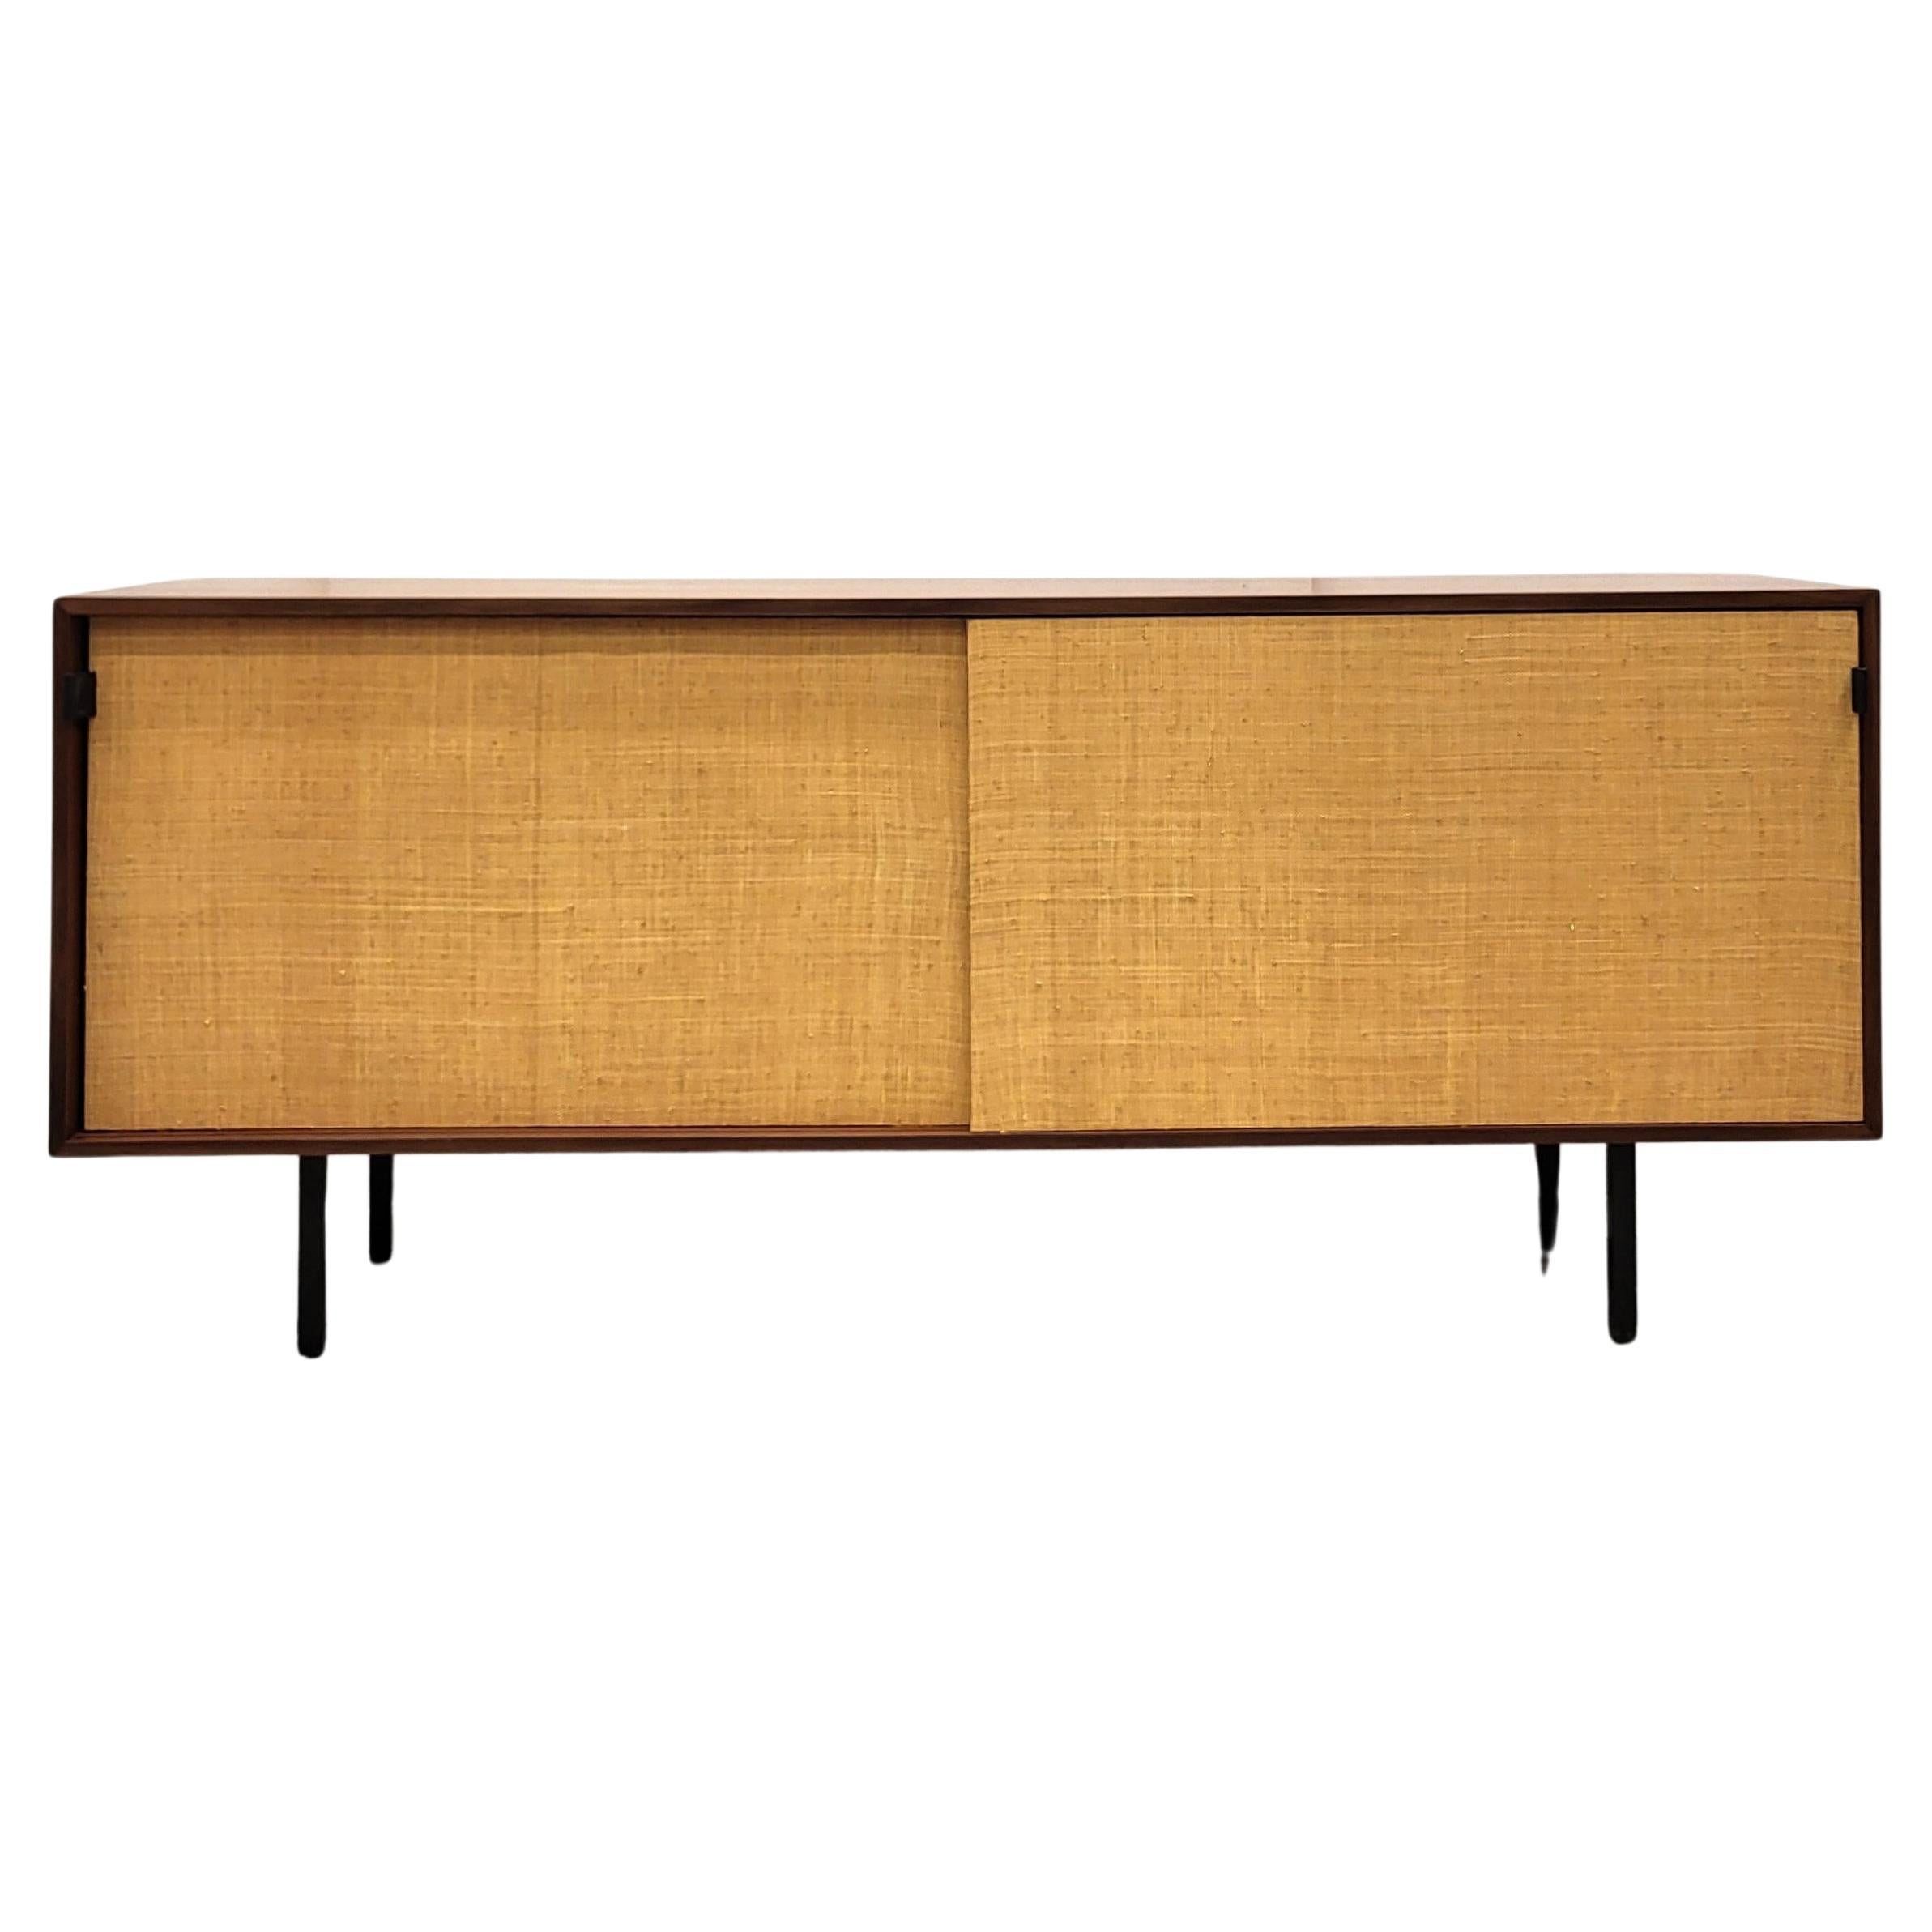 Florence Knoll Seagrass Sideboard Model 116 by Knoll, 1952 For Sale